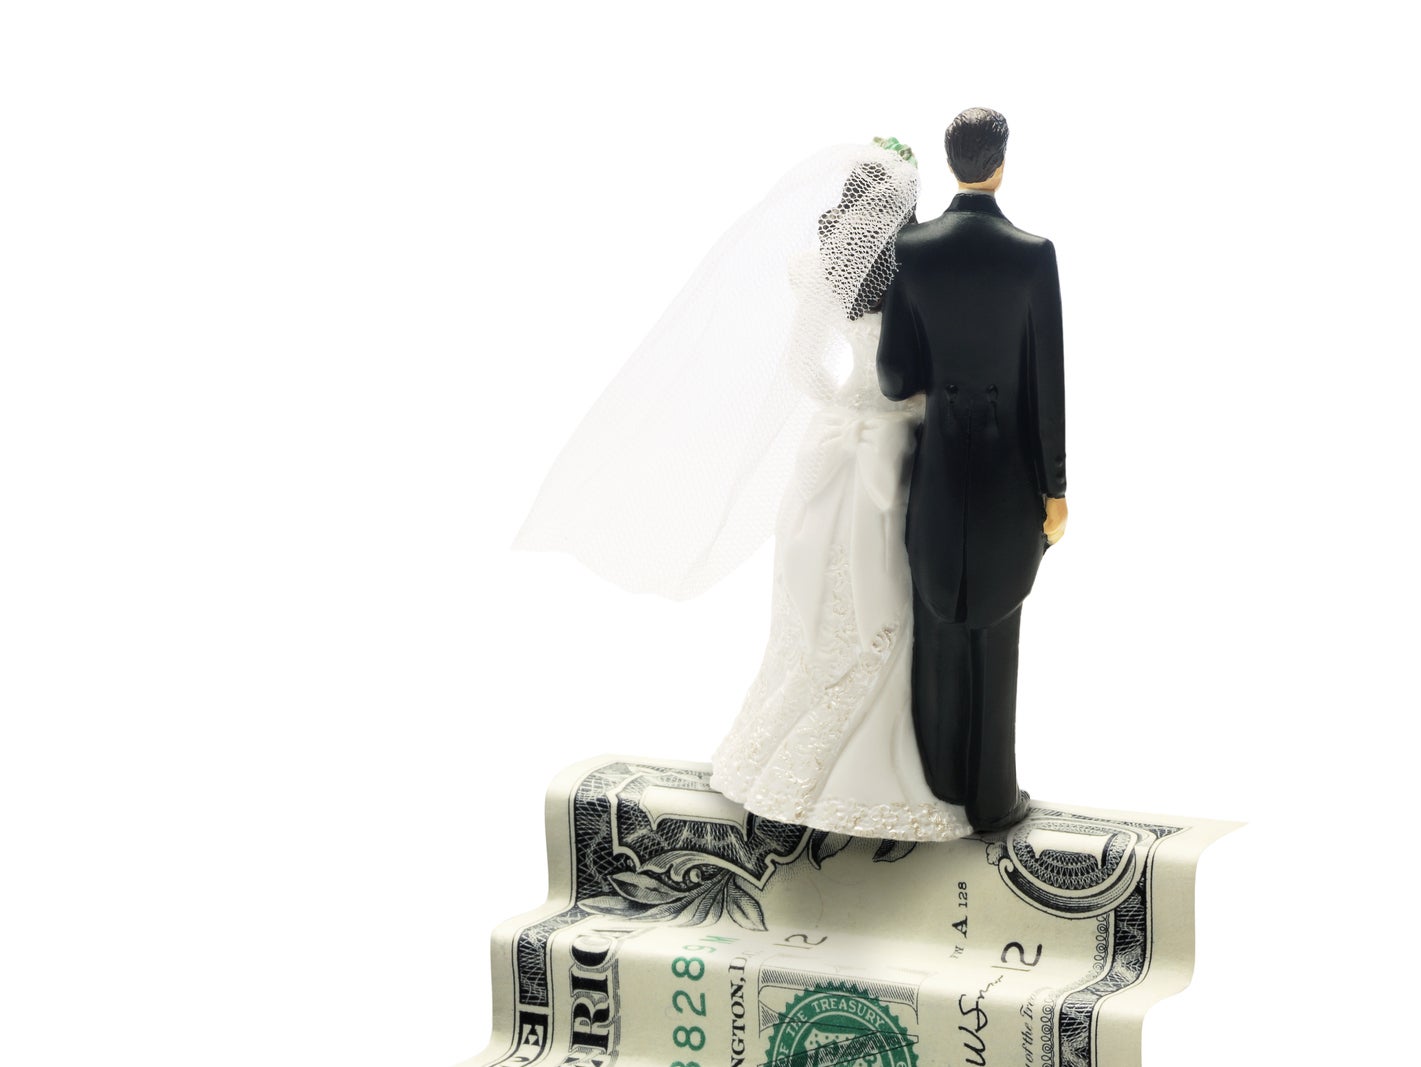 Married couples could save money through marriage allowance